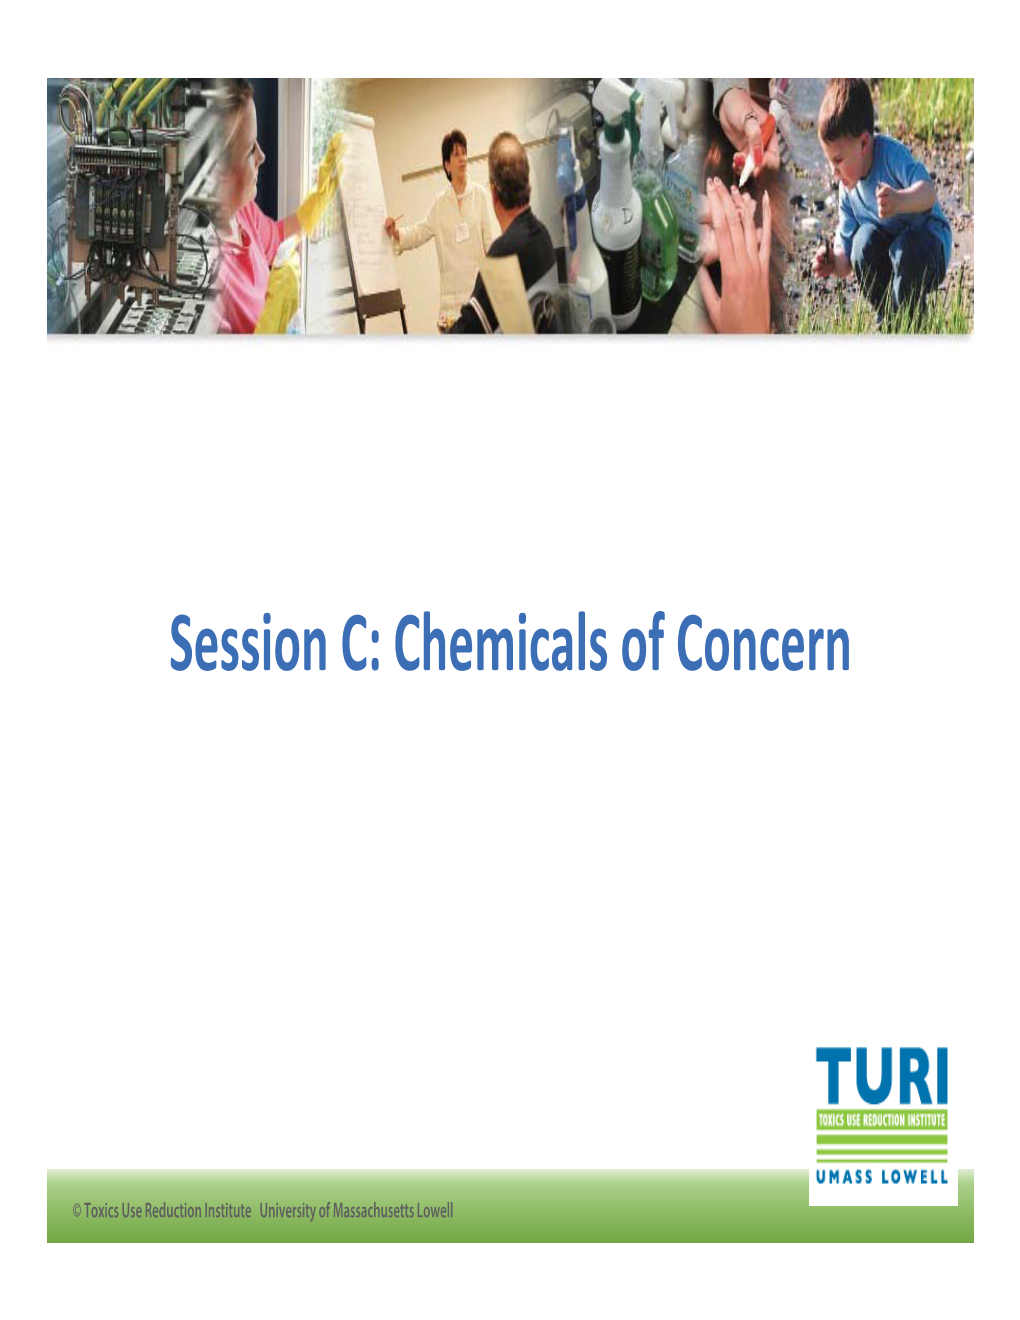 Session C: Chemicals of Concern